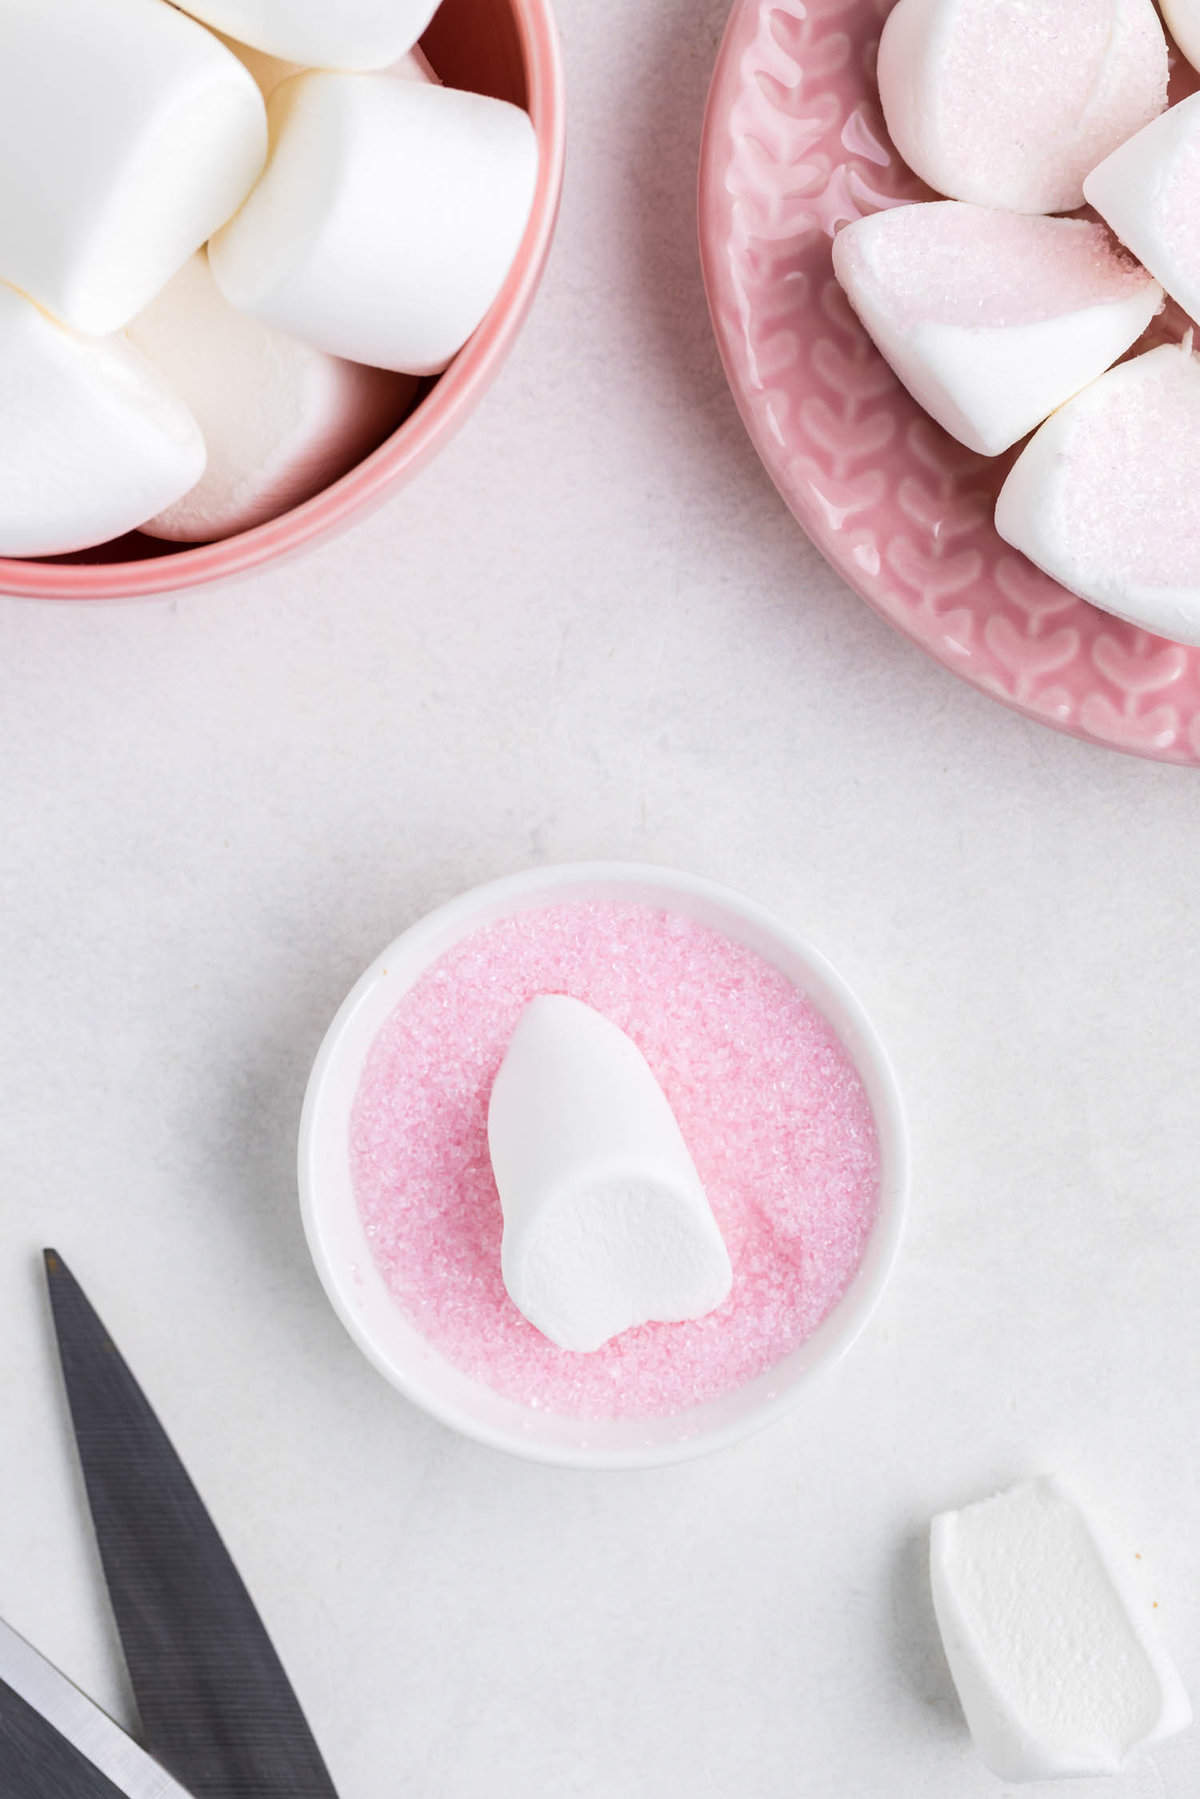 Cut the large marshmallows in half diagonally and dip into pink sugar.